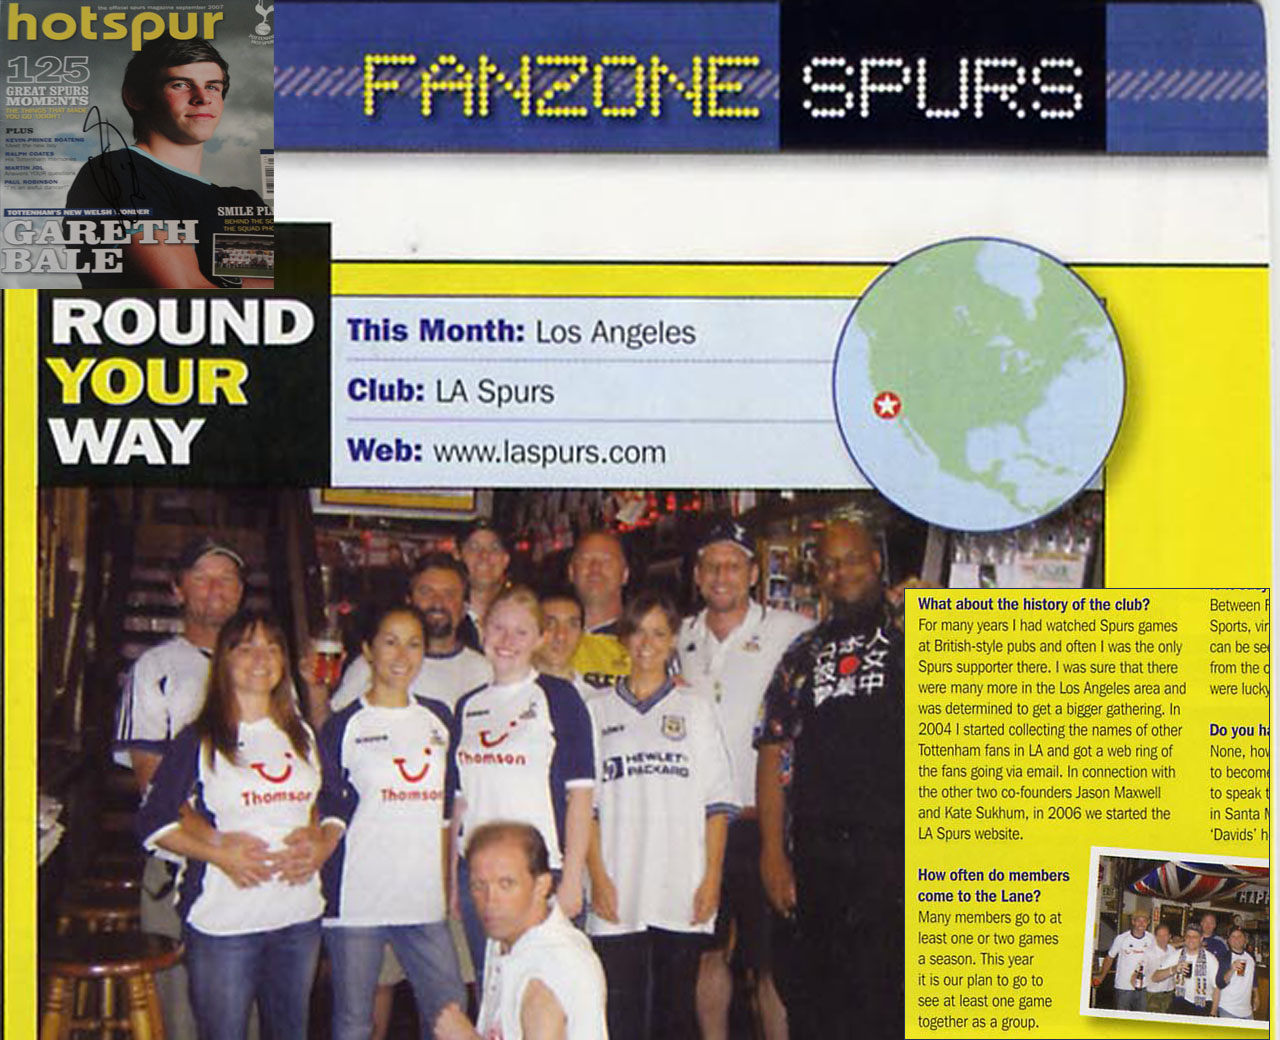 L.A. Spurs featured in September 2007 Hotspur Magazine